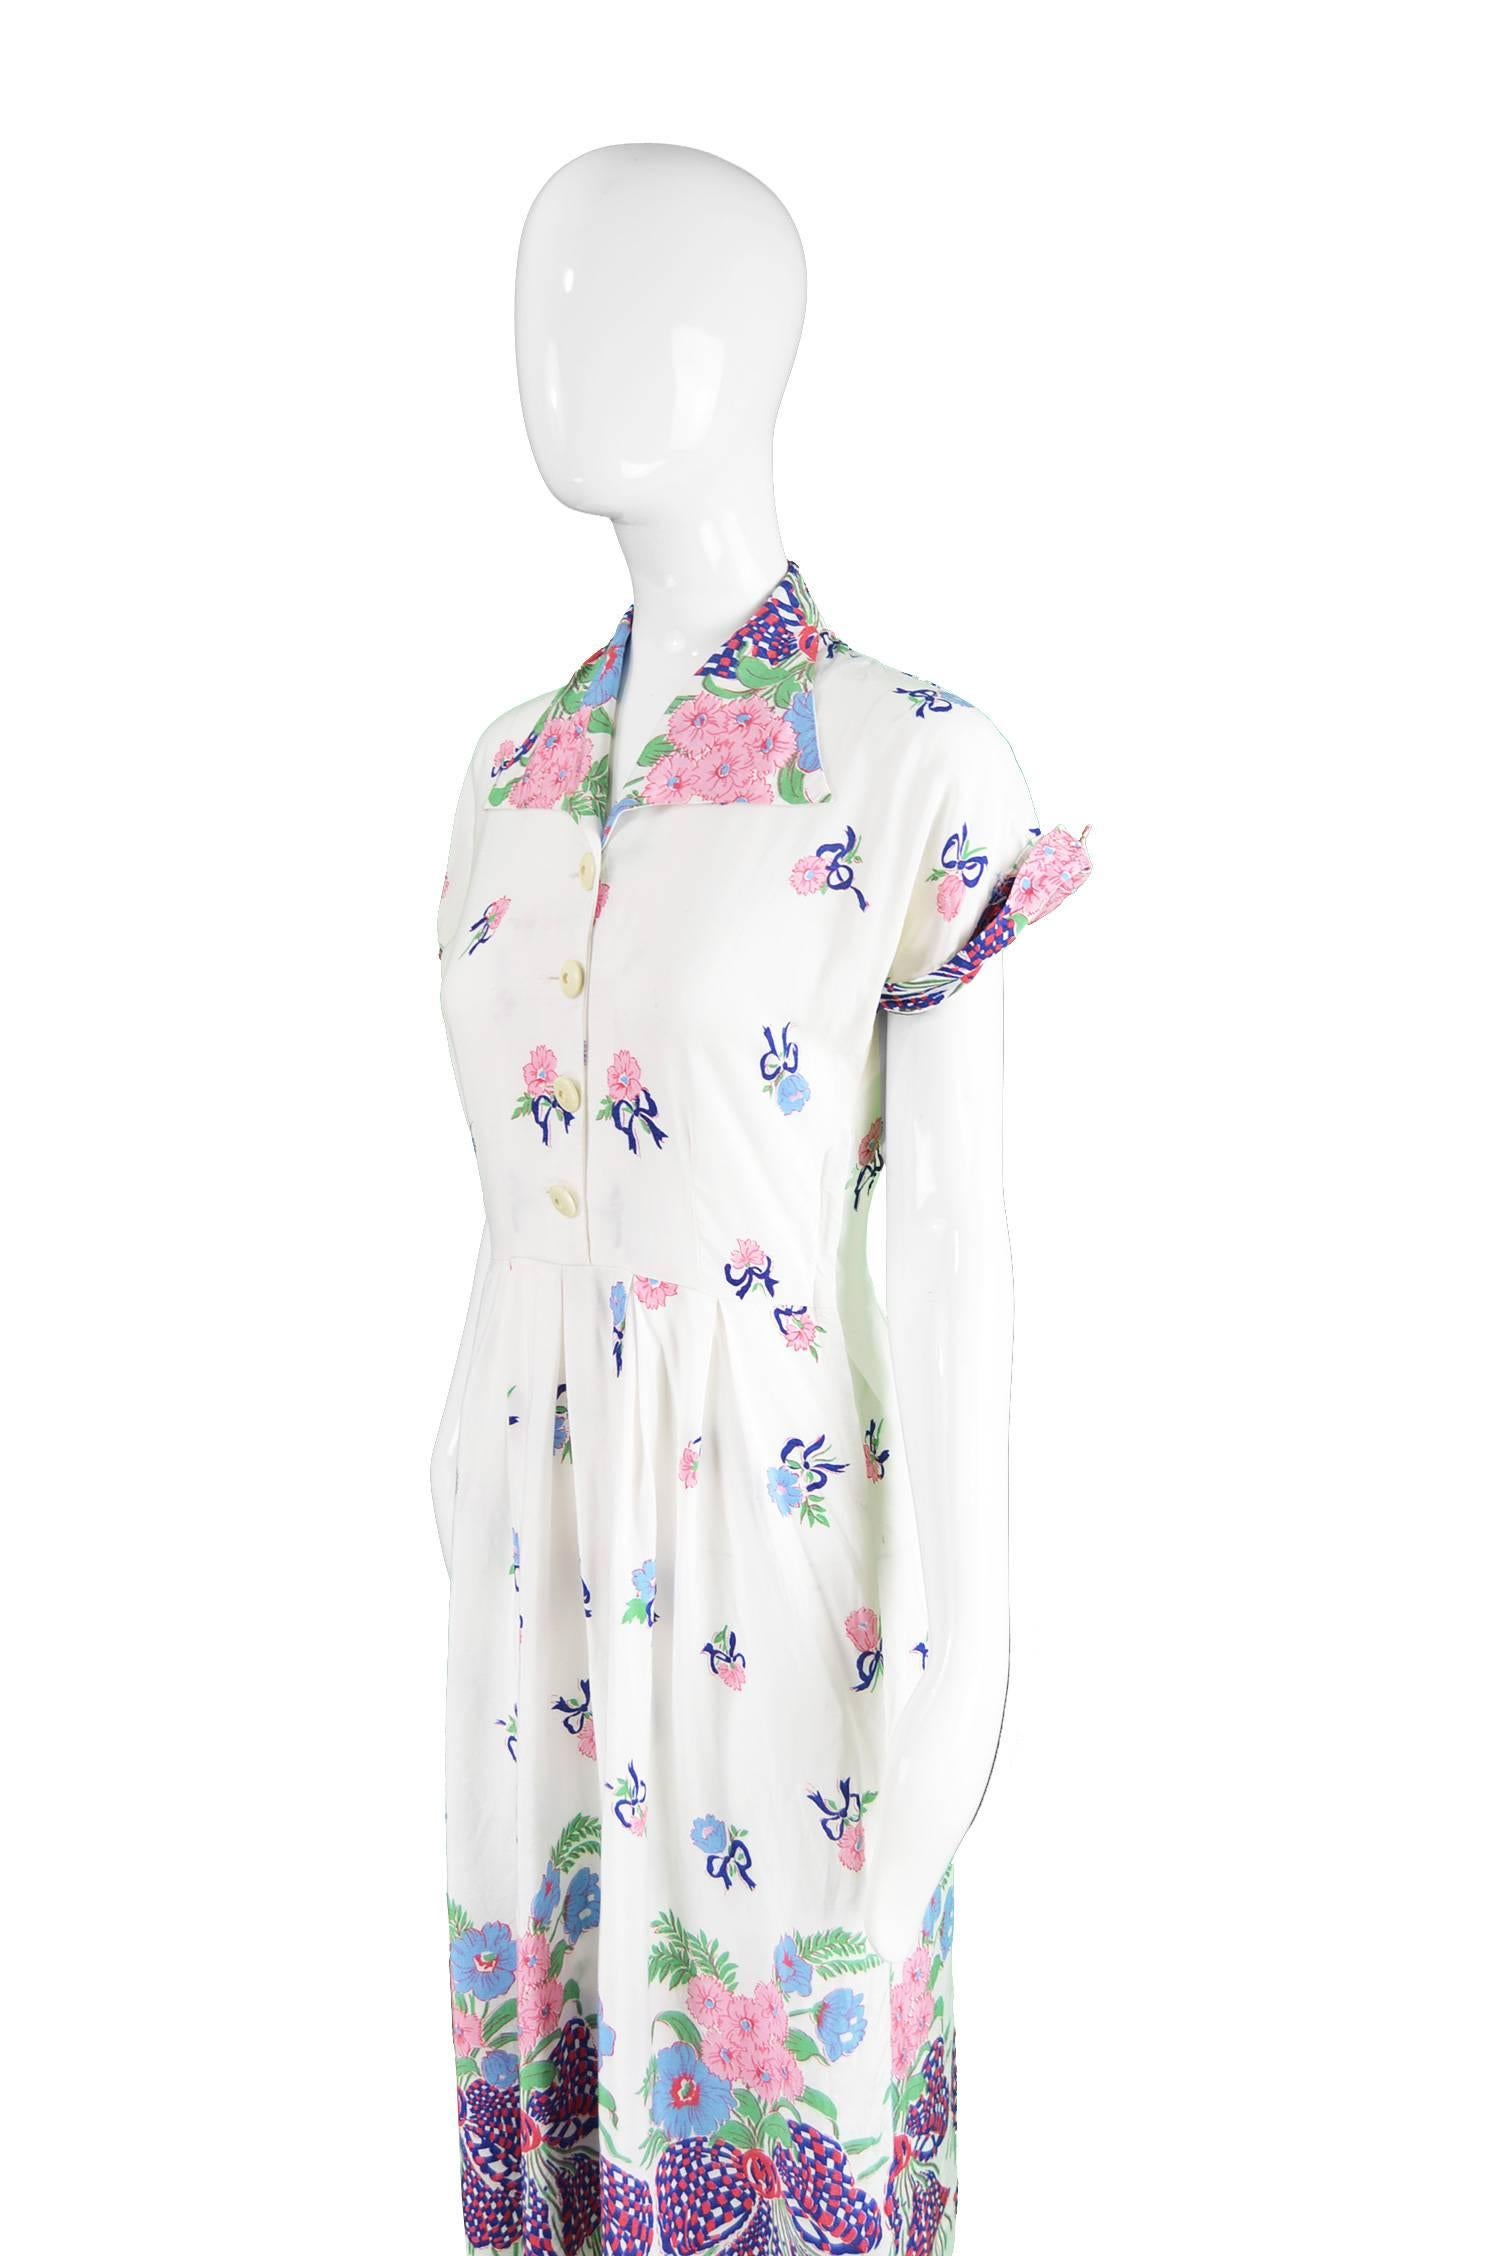 Vintage 1940s Novelty Ribbon Print Dress In Good Condition For Sale In Doncaster, South Yorkshire